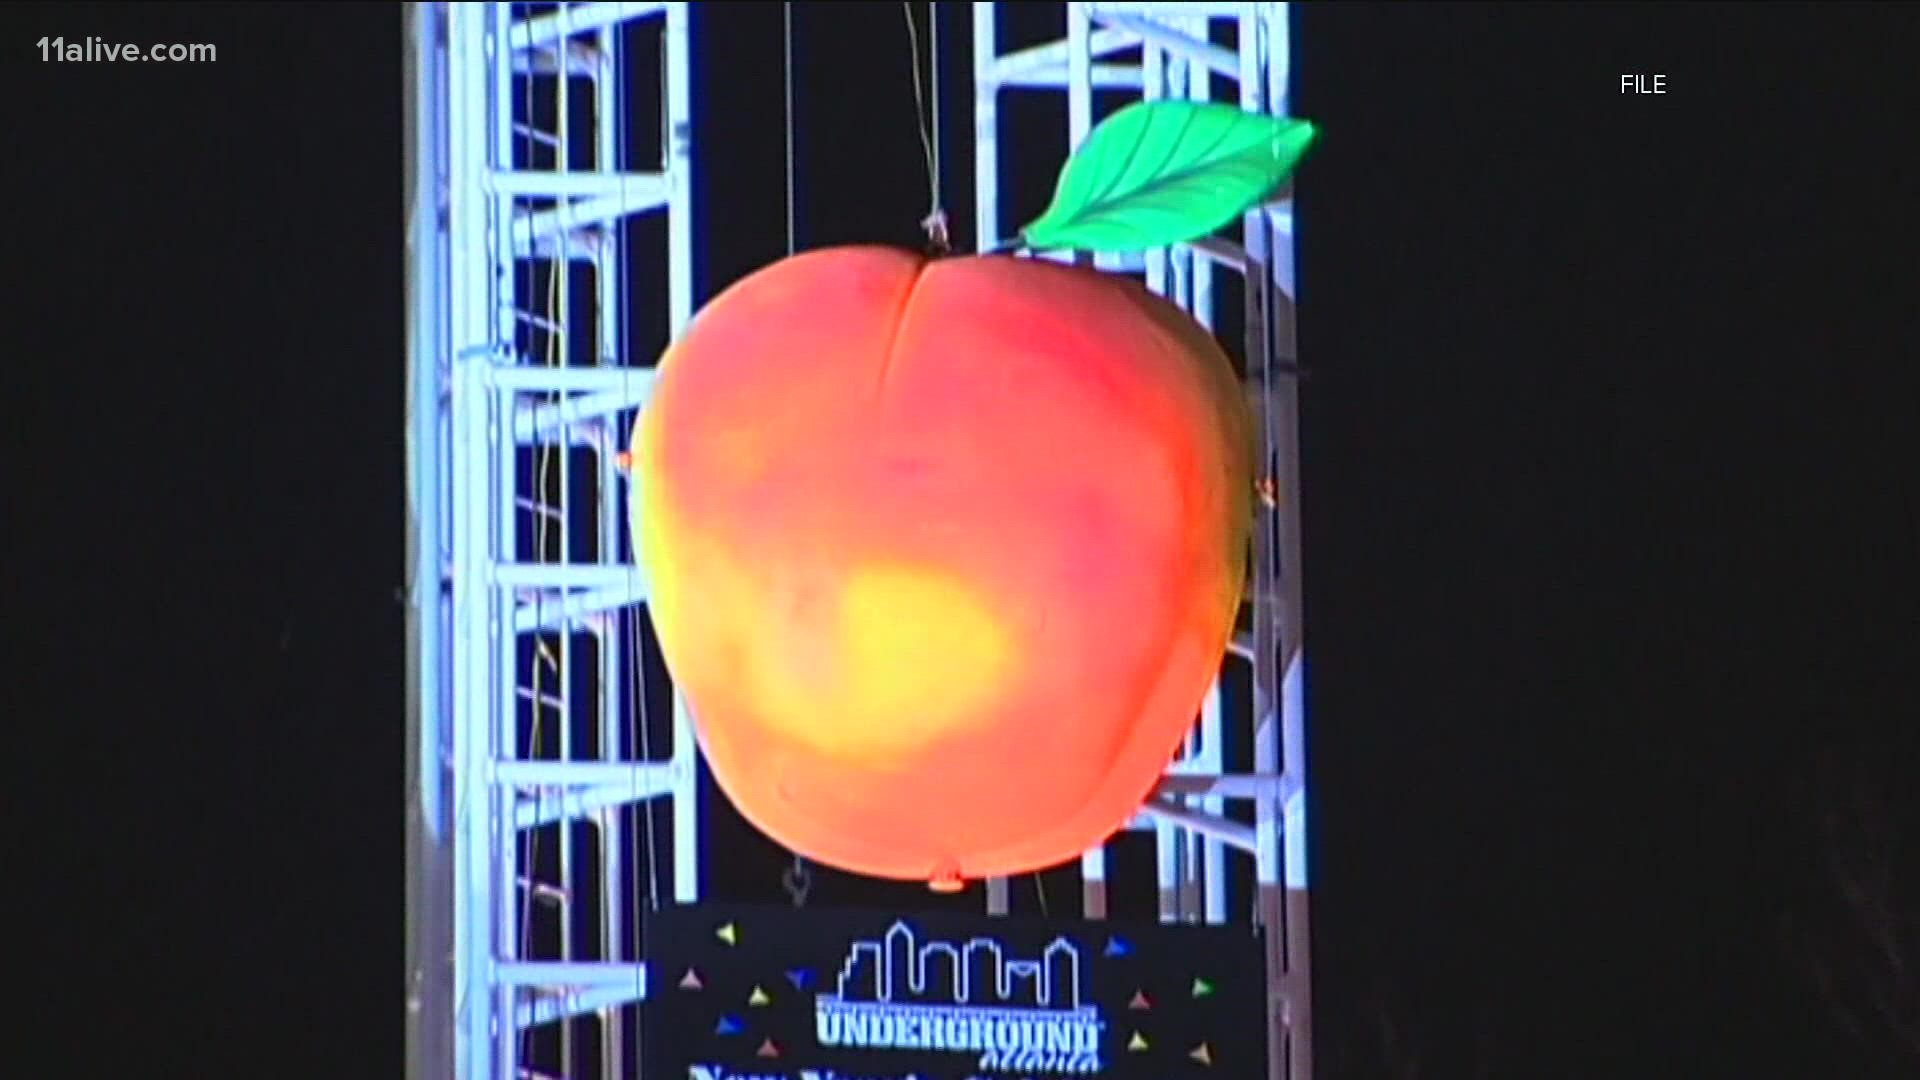 The Peach Drop has not been apart of Atlanta's New Year's Eve celebrations since 2018.